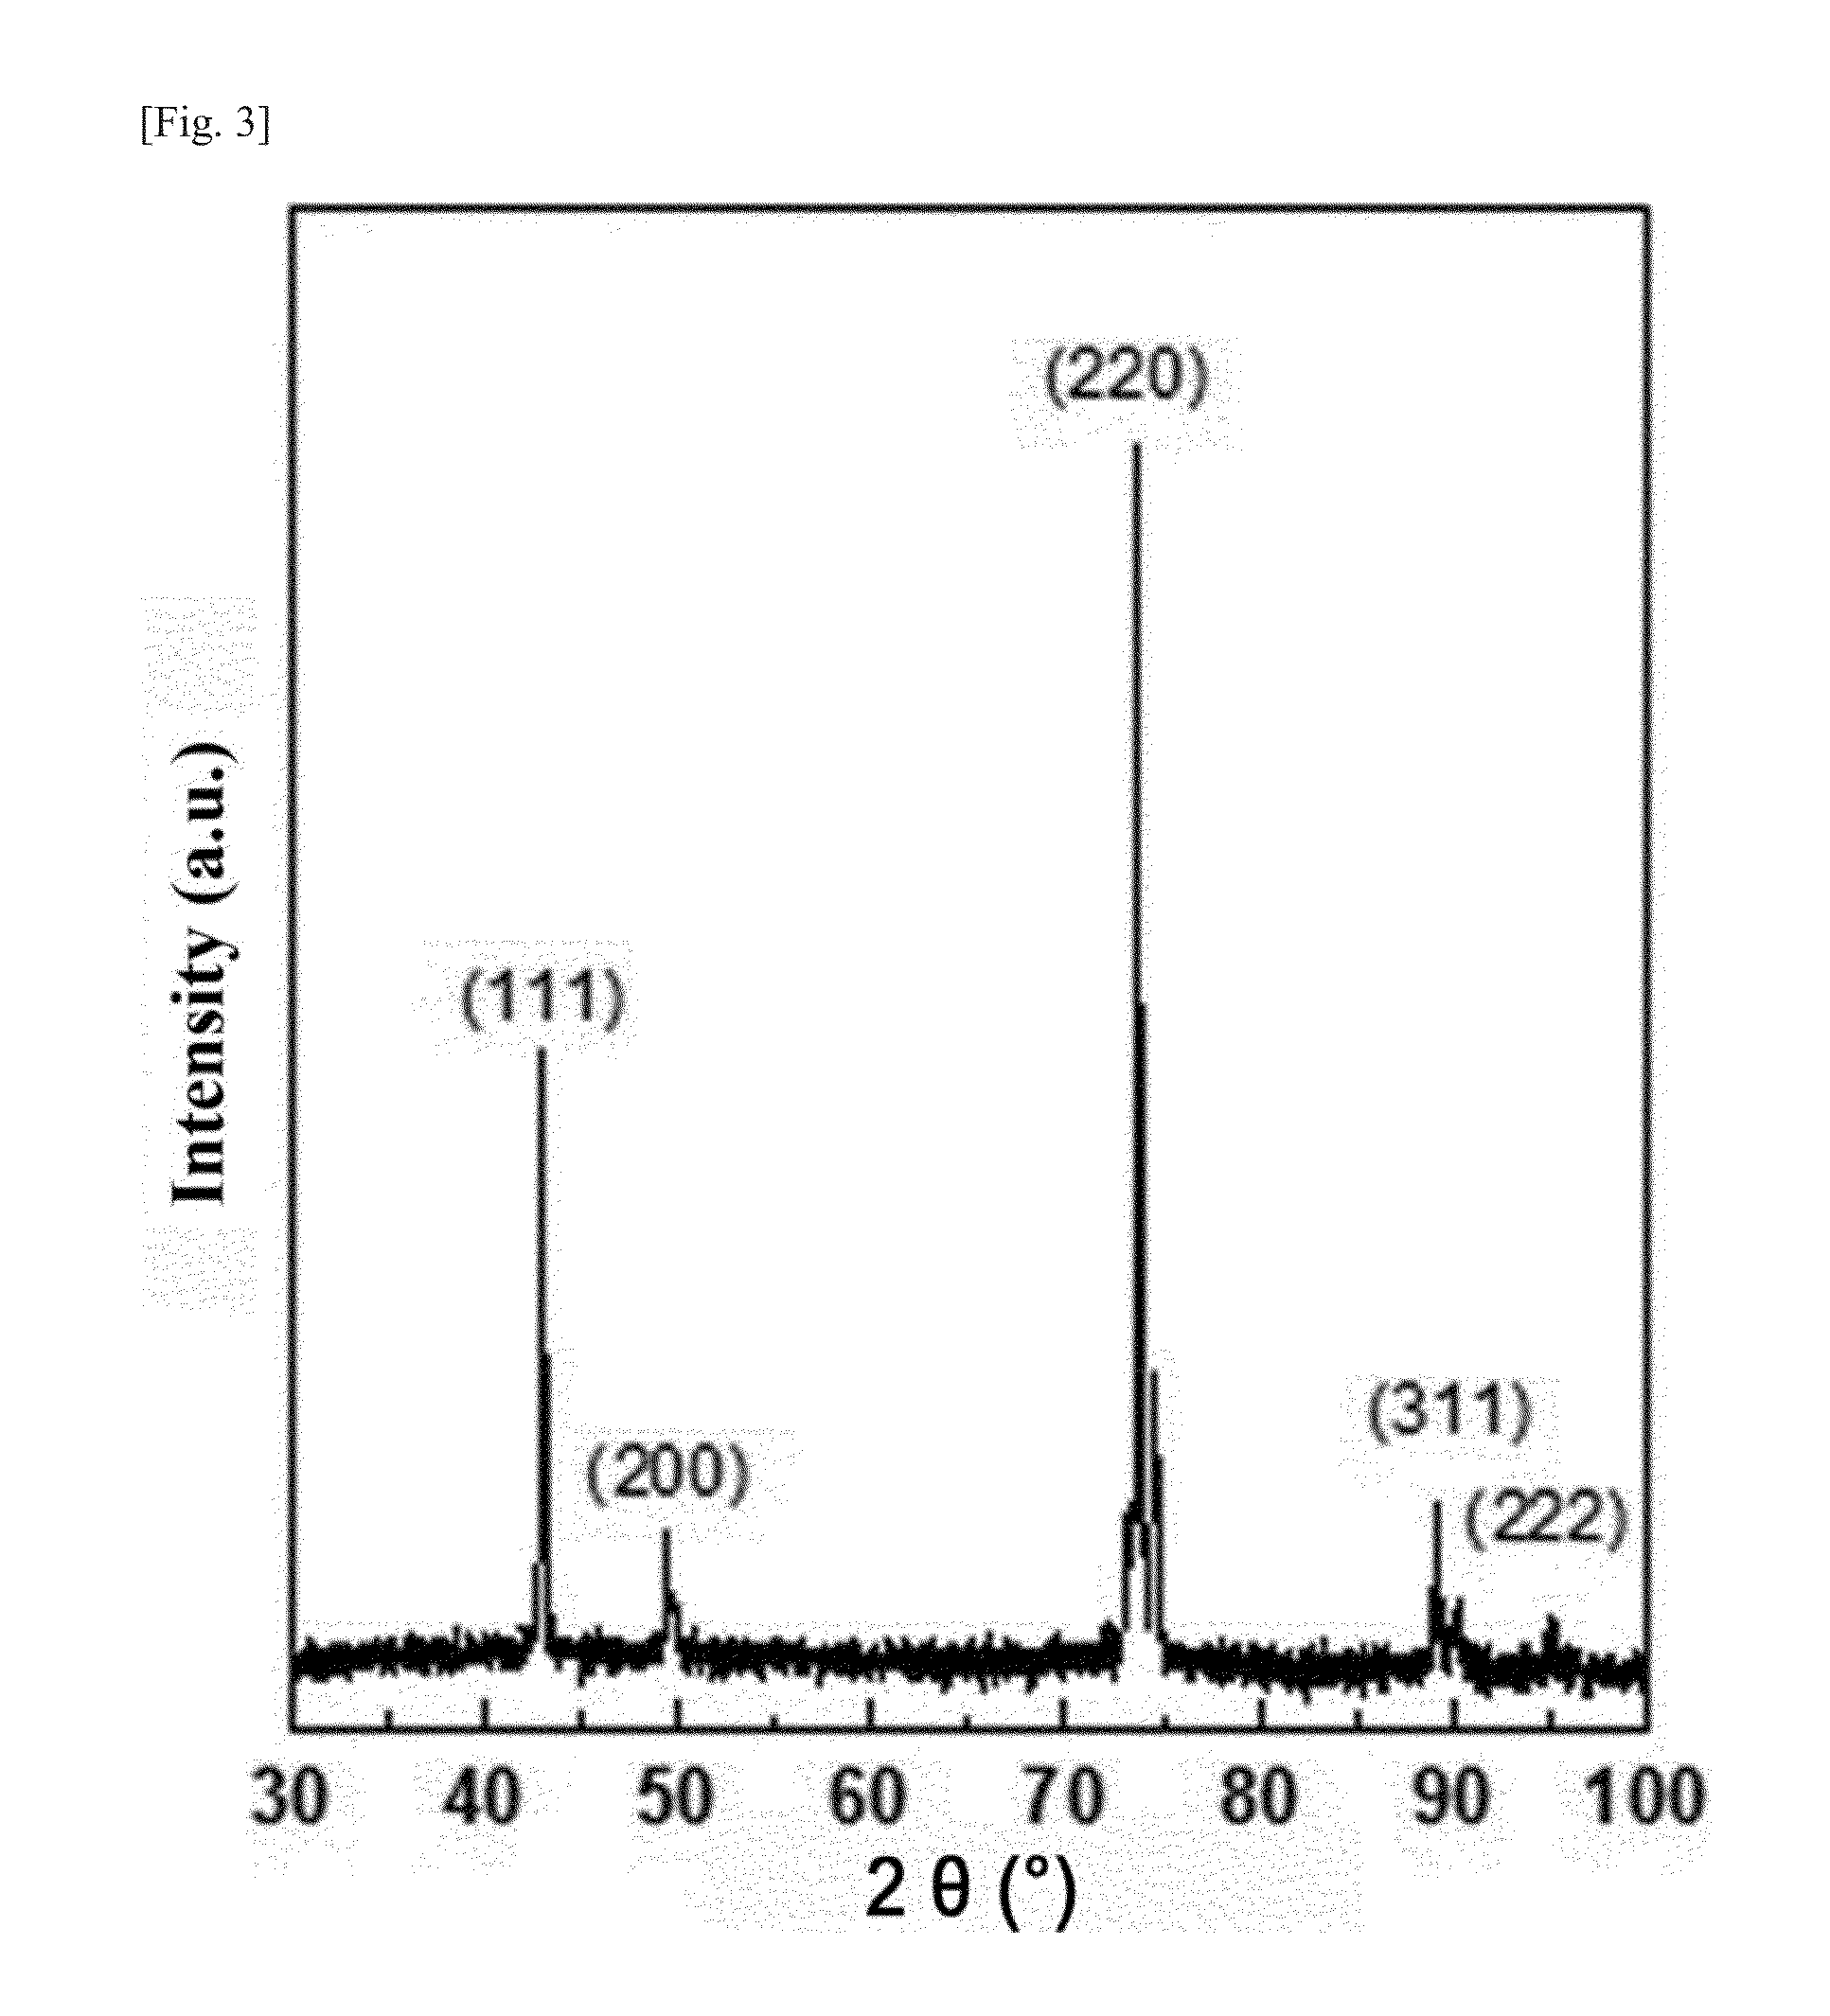 Large-area single-crystal monolayer graphene film and method for producing the same